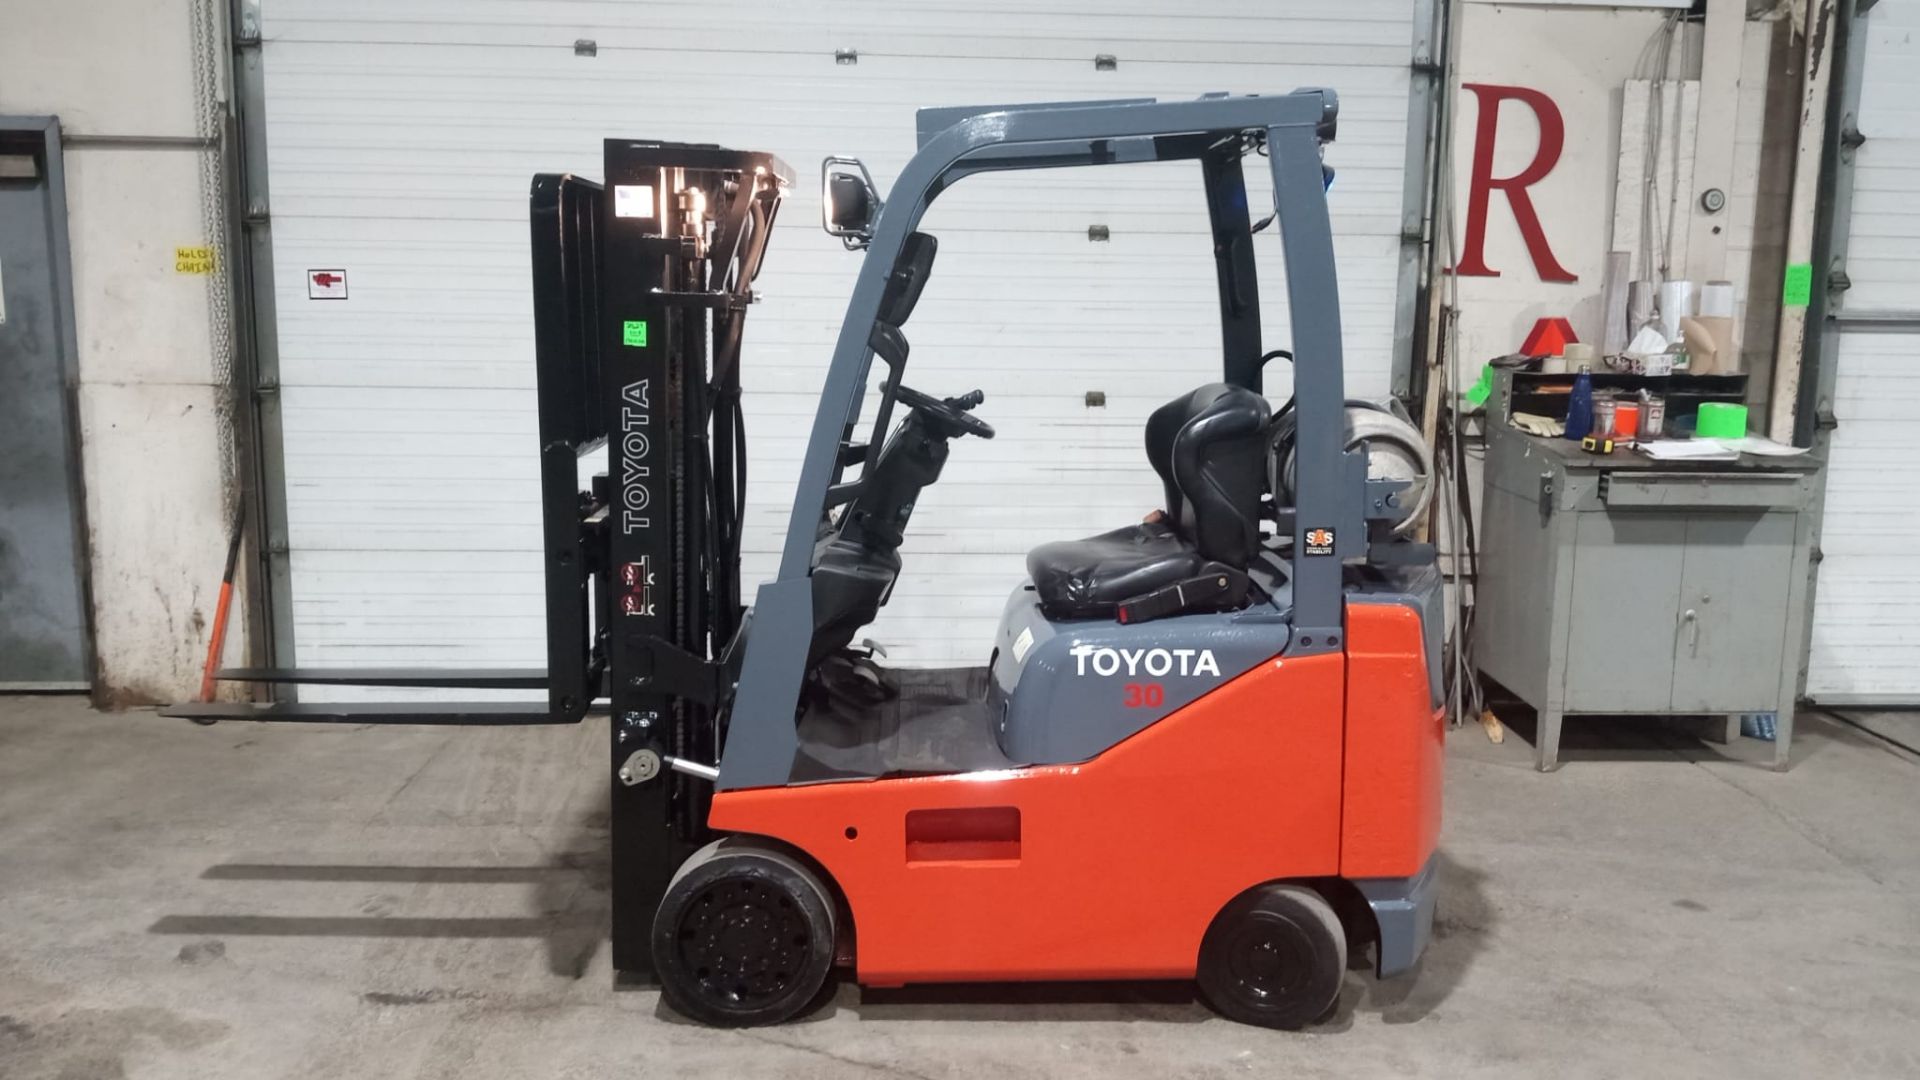 2018 TOYOTA 3,000lbs Capacity LPG (Propane) Forklift with sideshift and 3-STAGE MAST (no propane - Image 2 of 6